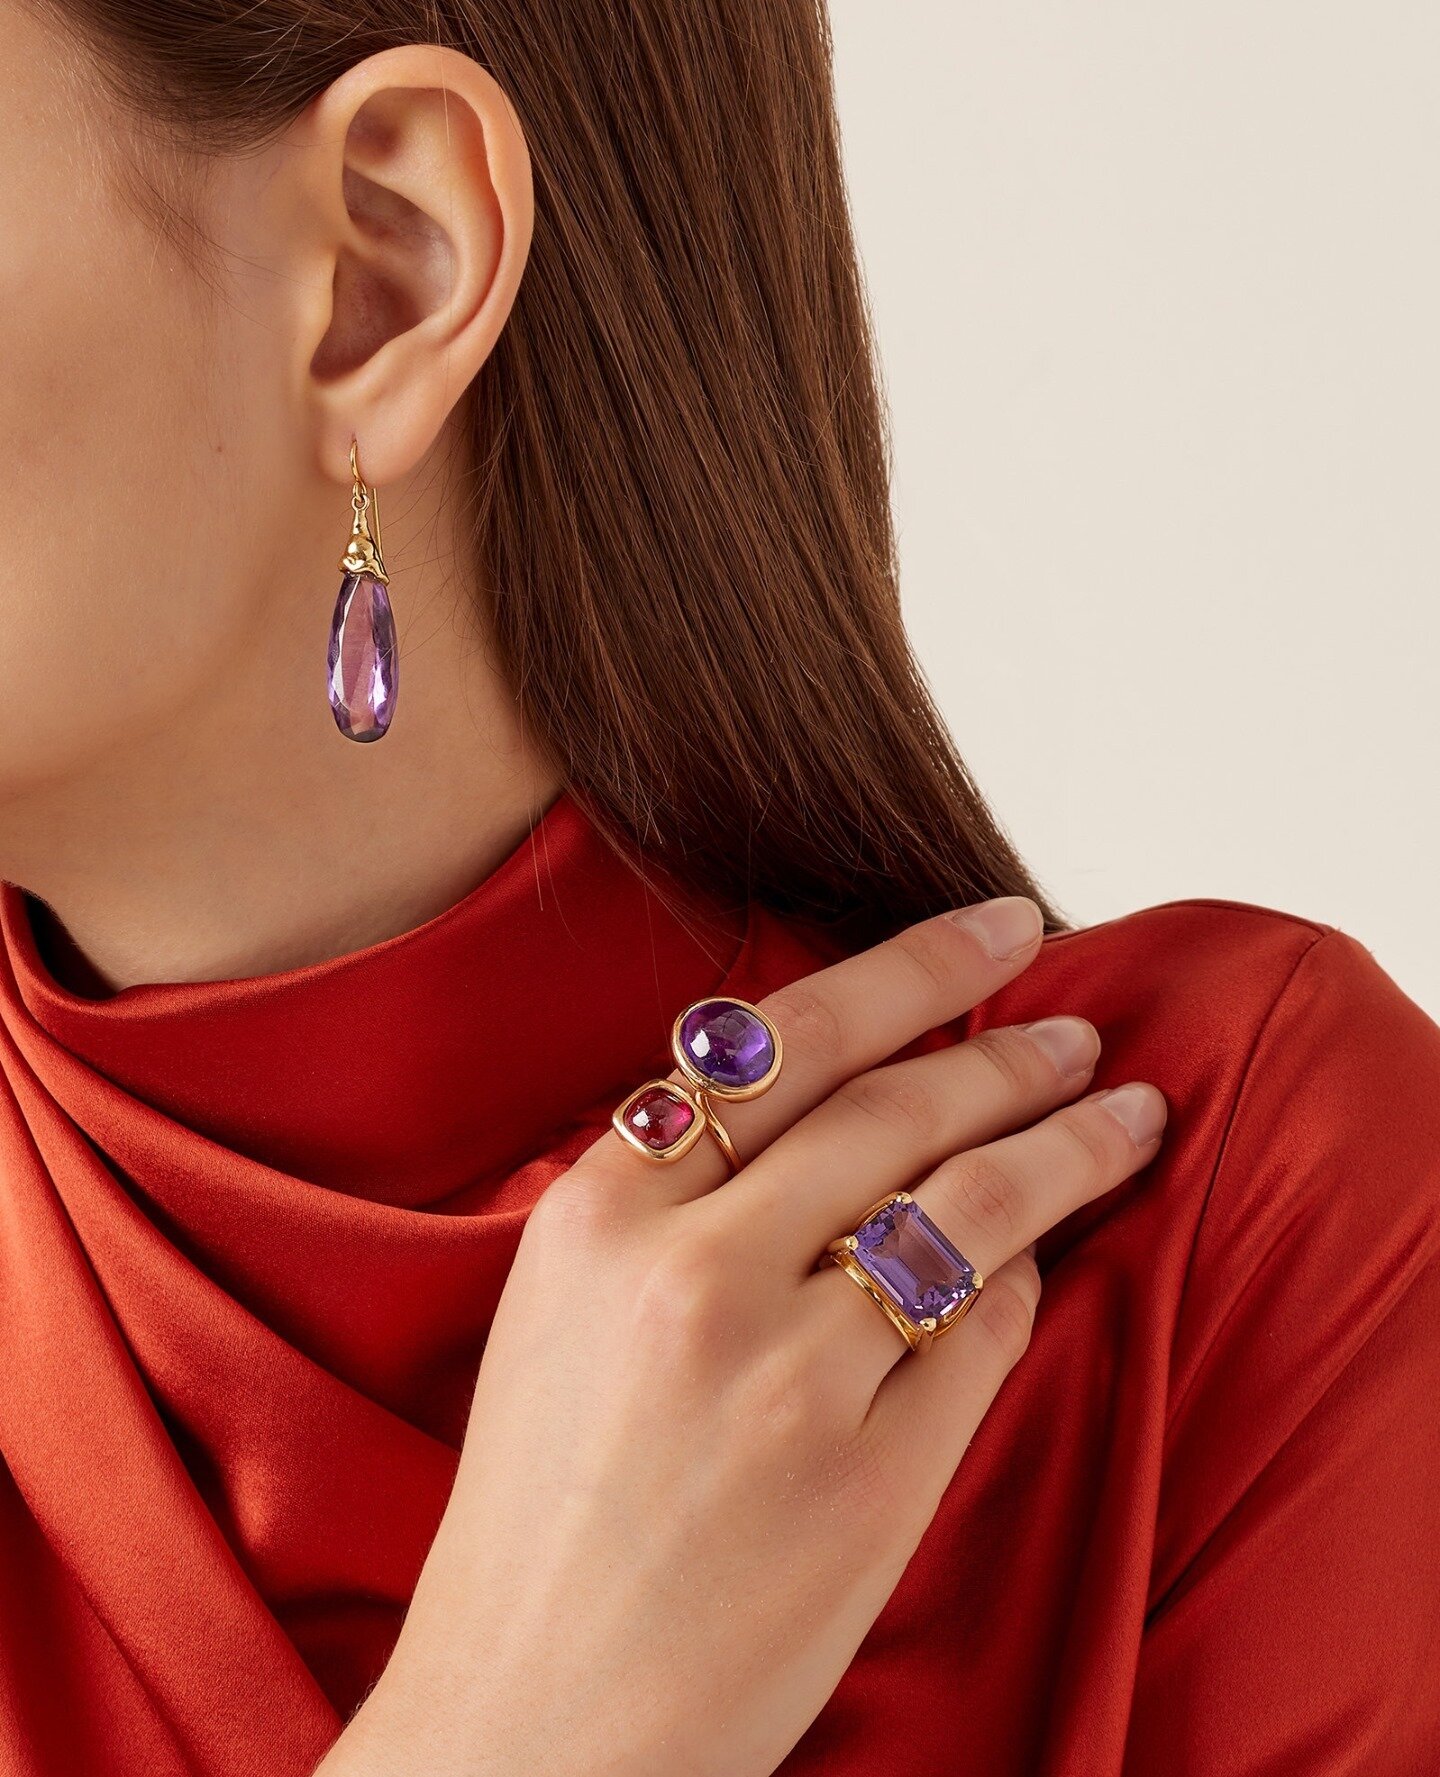 Our work reflects a respect for clean, organic, bold, colorful, and happy pieces that can be incorporated in the life of a busy executive or a Fashionista. Shop now at the link in our bio. #DaleNovickCollection⁠
.⁠
.⁠
.⁠
.⁠
.⁠
.⁠
#Jewelry #FineJewelr